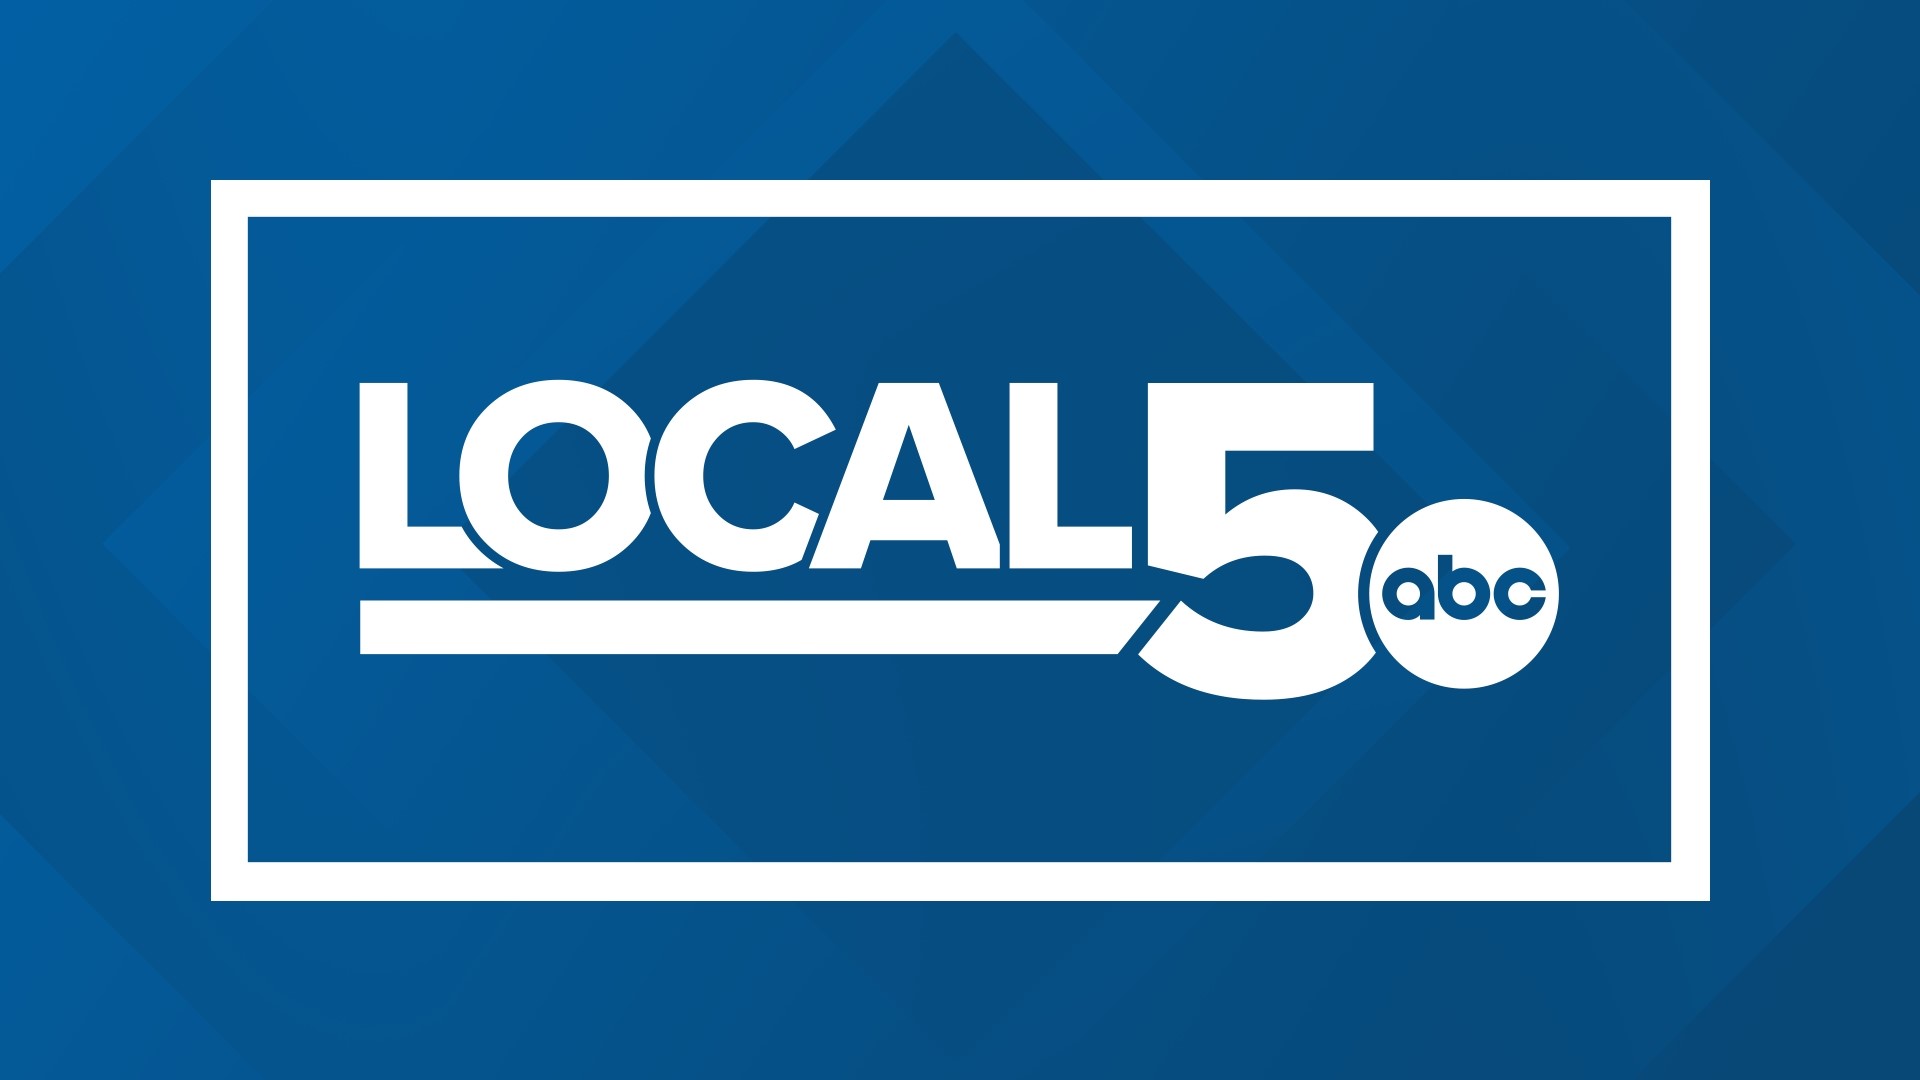 Local 5 News at 5 gives you the latest local news and weather, plus headlines and news updates from across the country.